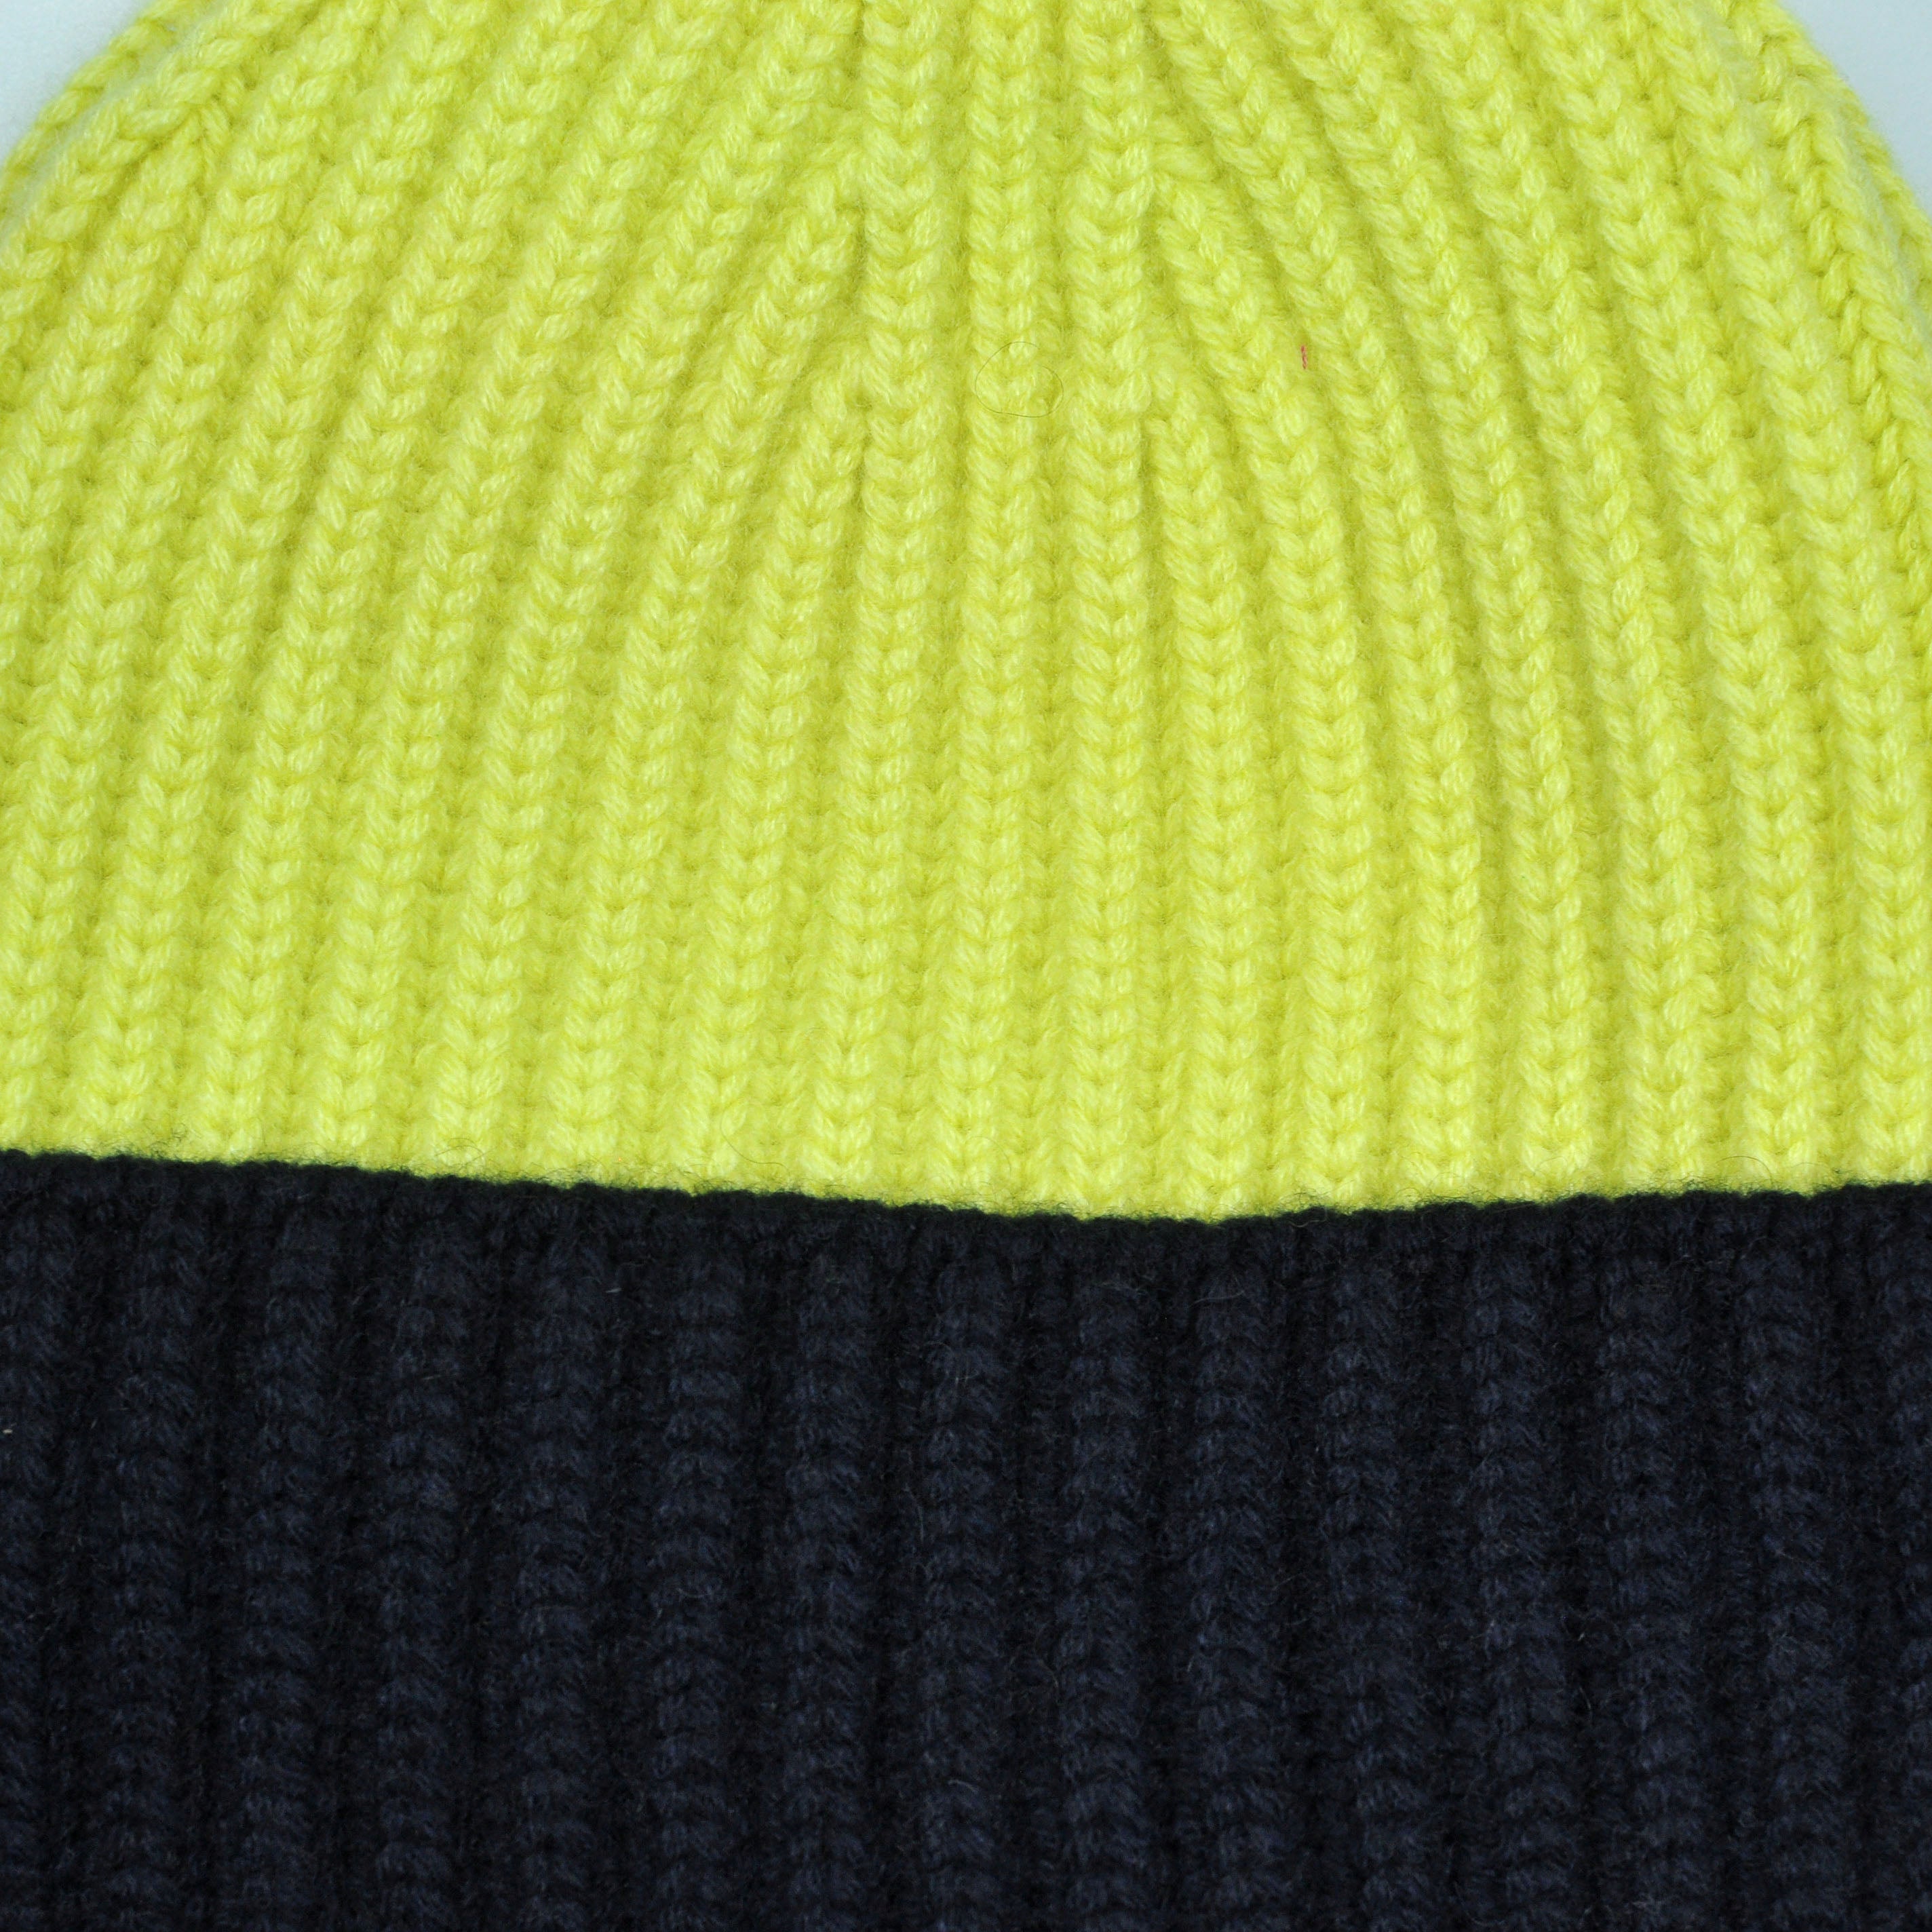 Four Ply Cashmere Winter Beanie in Lemon & Midnight Blue